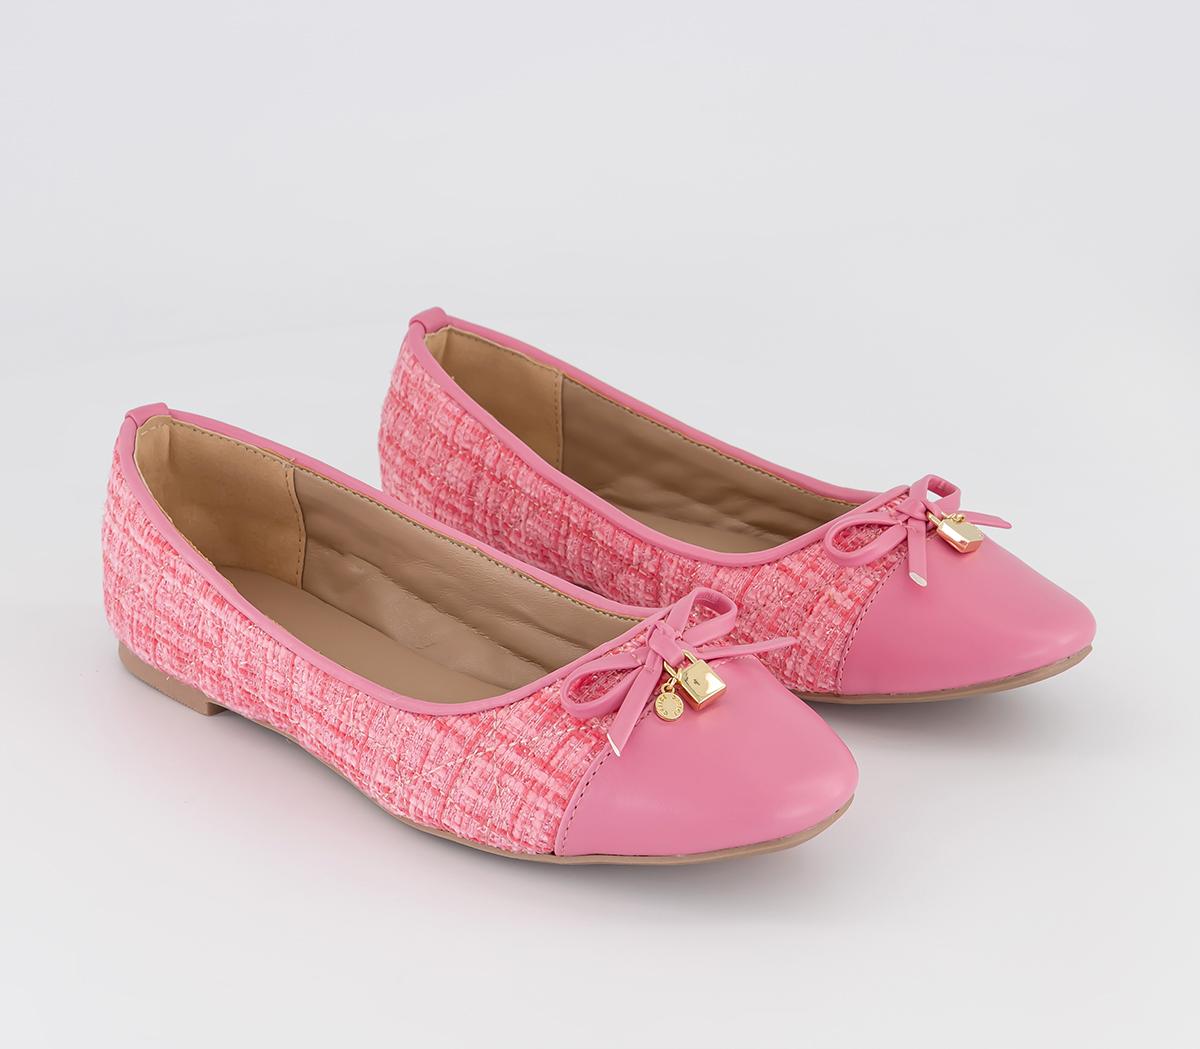 OFFICE Womens Forevermore Charm Ballet Pumps Pink, 3